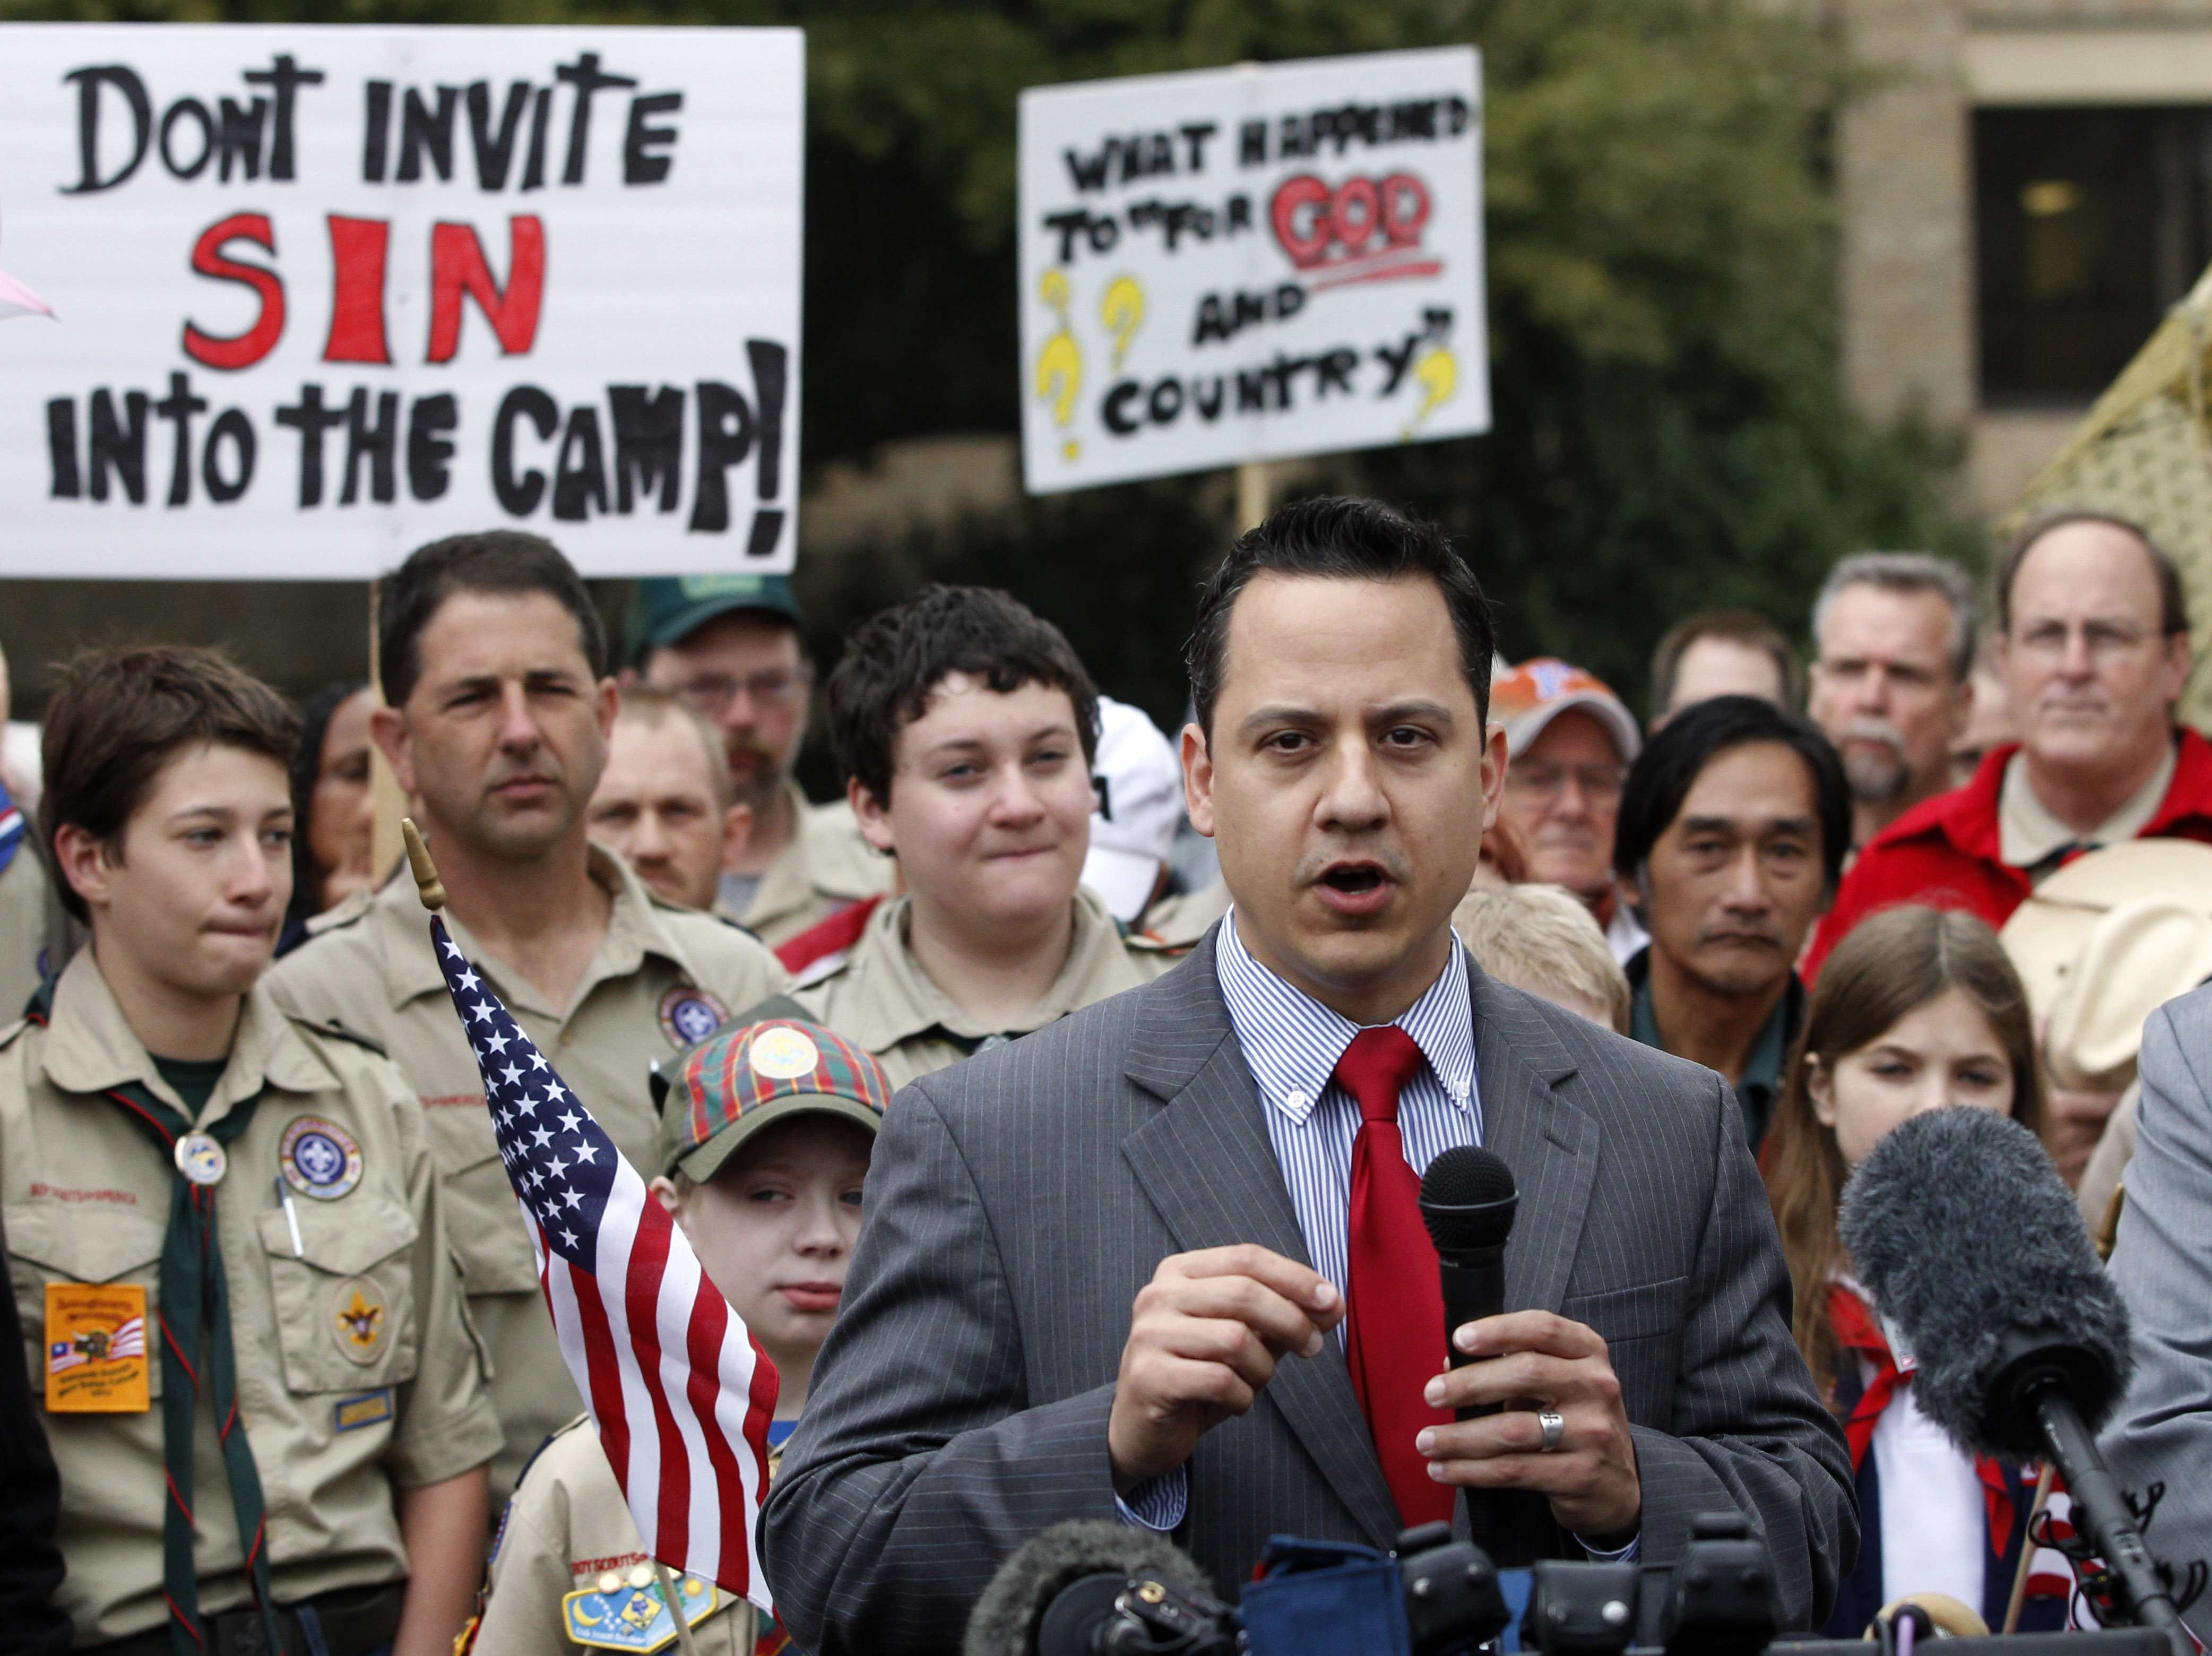 Jonathan Saenz, president of Texas Values, speaks during a prayer vigil and rally outside the Boy Scouts of America headquarters in Irving, Texas, Feb. 6. Saenz, a Catholic attorney, urged the Boy Scouts not to end its ban on openly homosexual scouts and troop leaders. (CNS photo: Darrell Byers/Reuters)